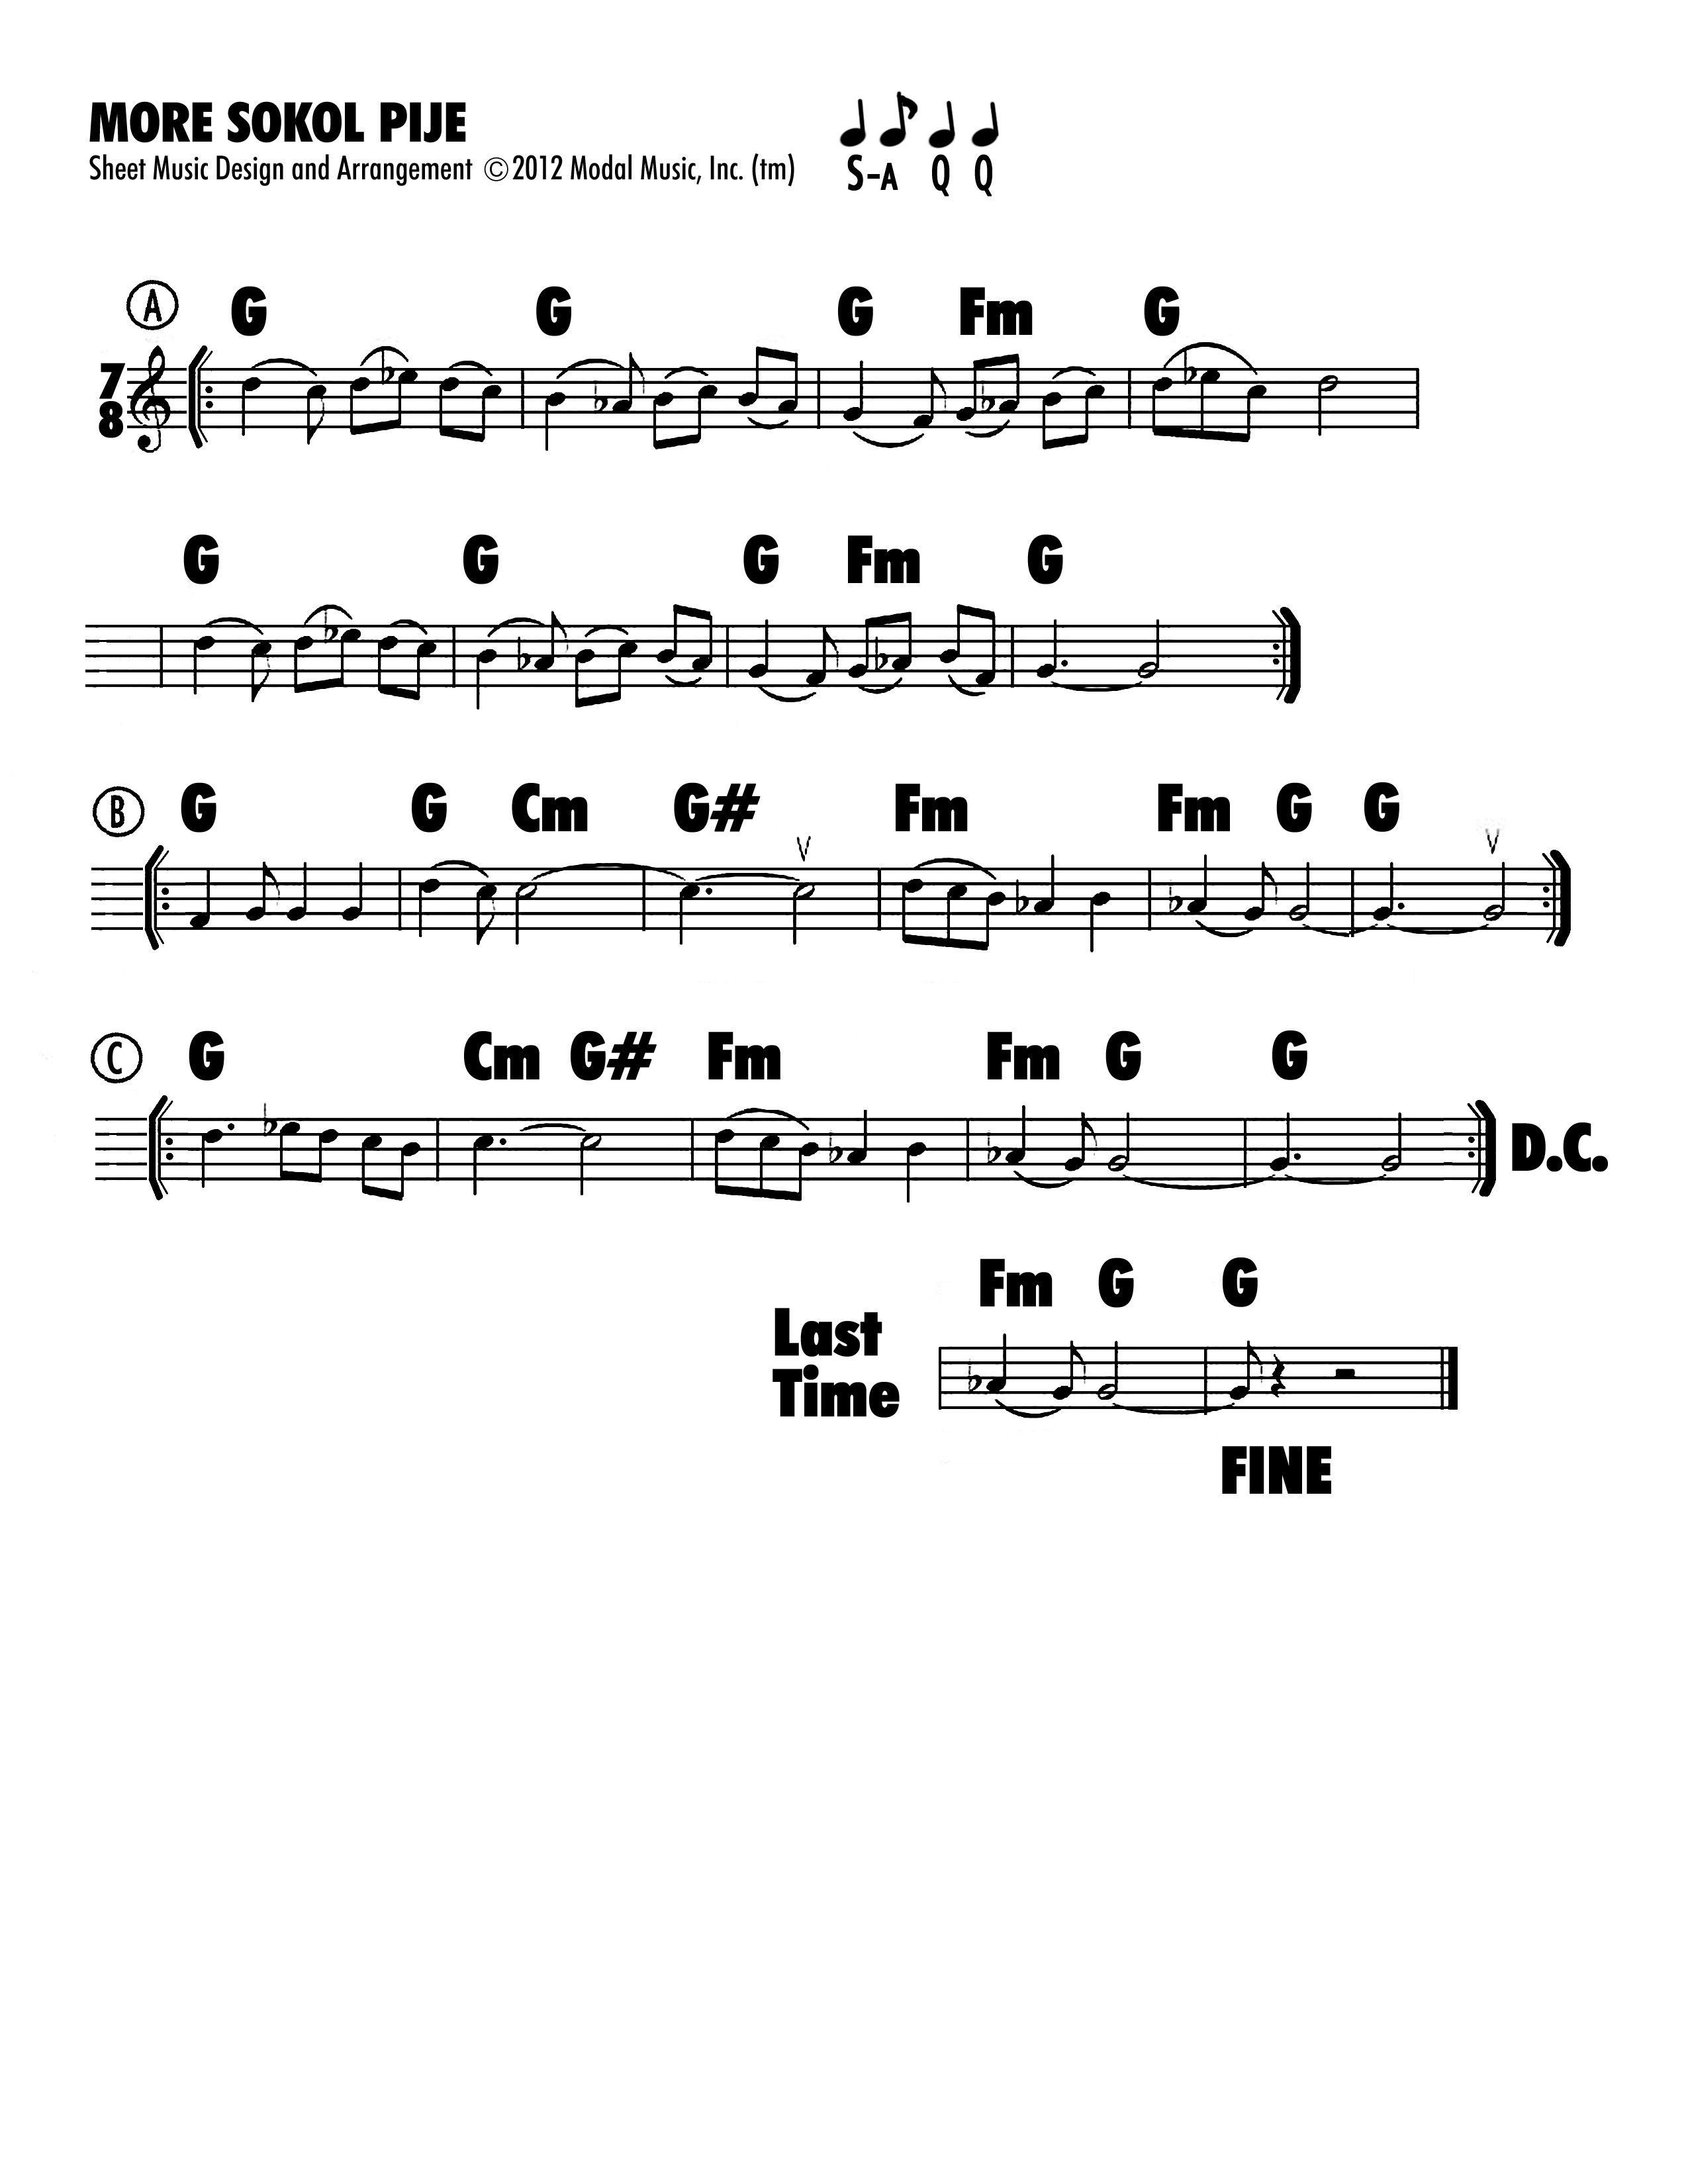 Image of sheet music of More Sokol Pije that accompanies the Jutta & the Hi-Dukes (tm) presentation at Paul Tyler’s Fiddle Club. Click on link to download.